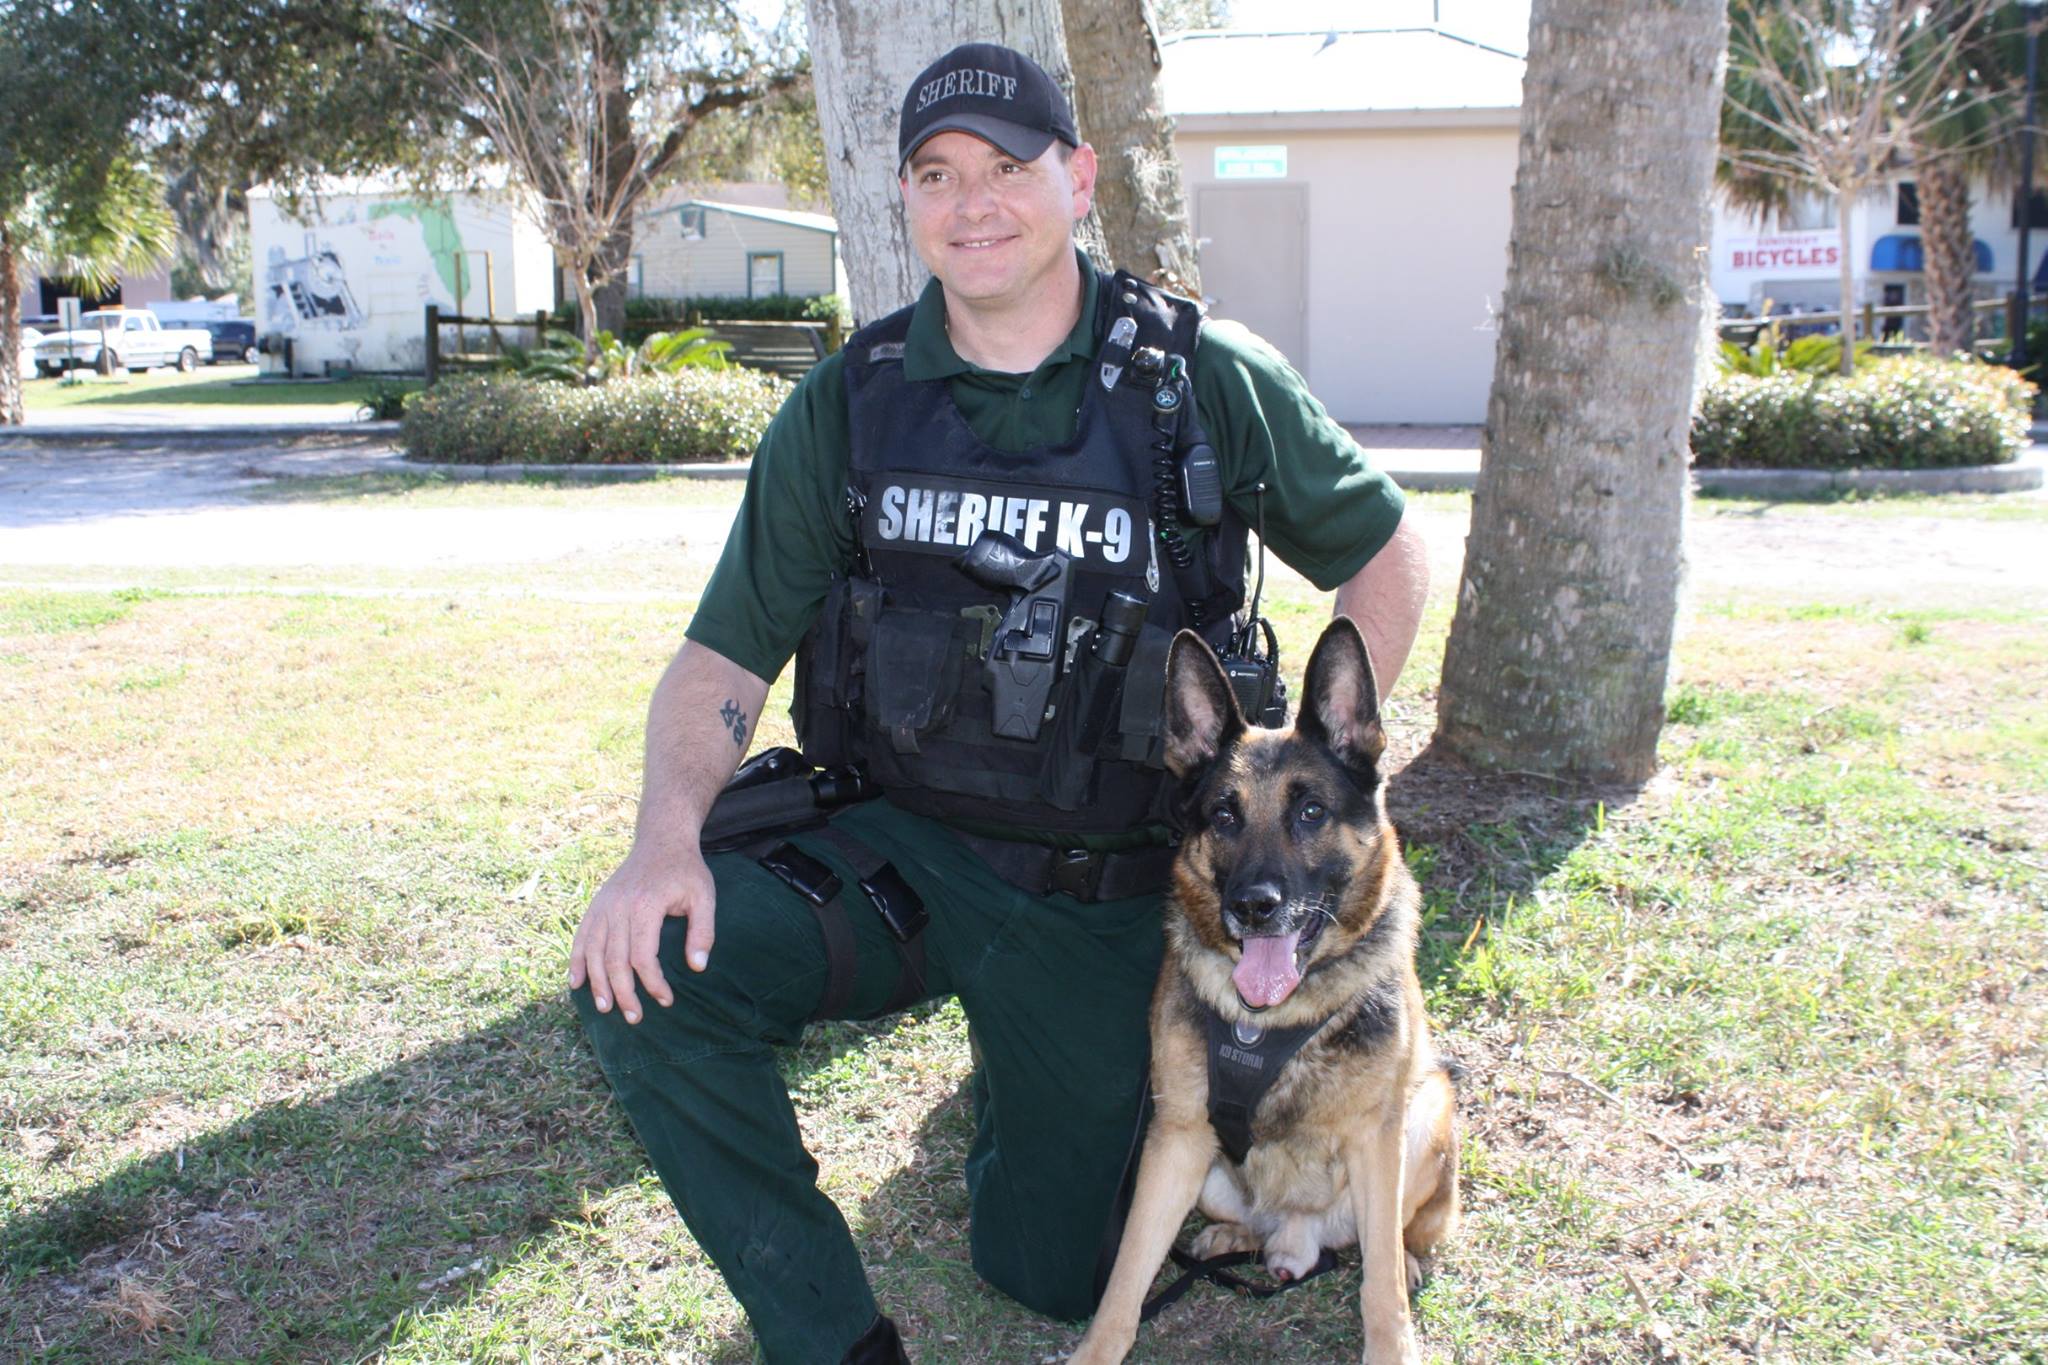 PHOTO: Deputy Jonathan Behnen seen here in file photo released by the Citrus County Sheriff's Office.